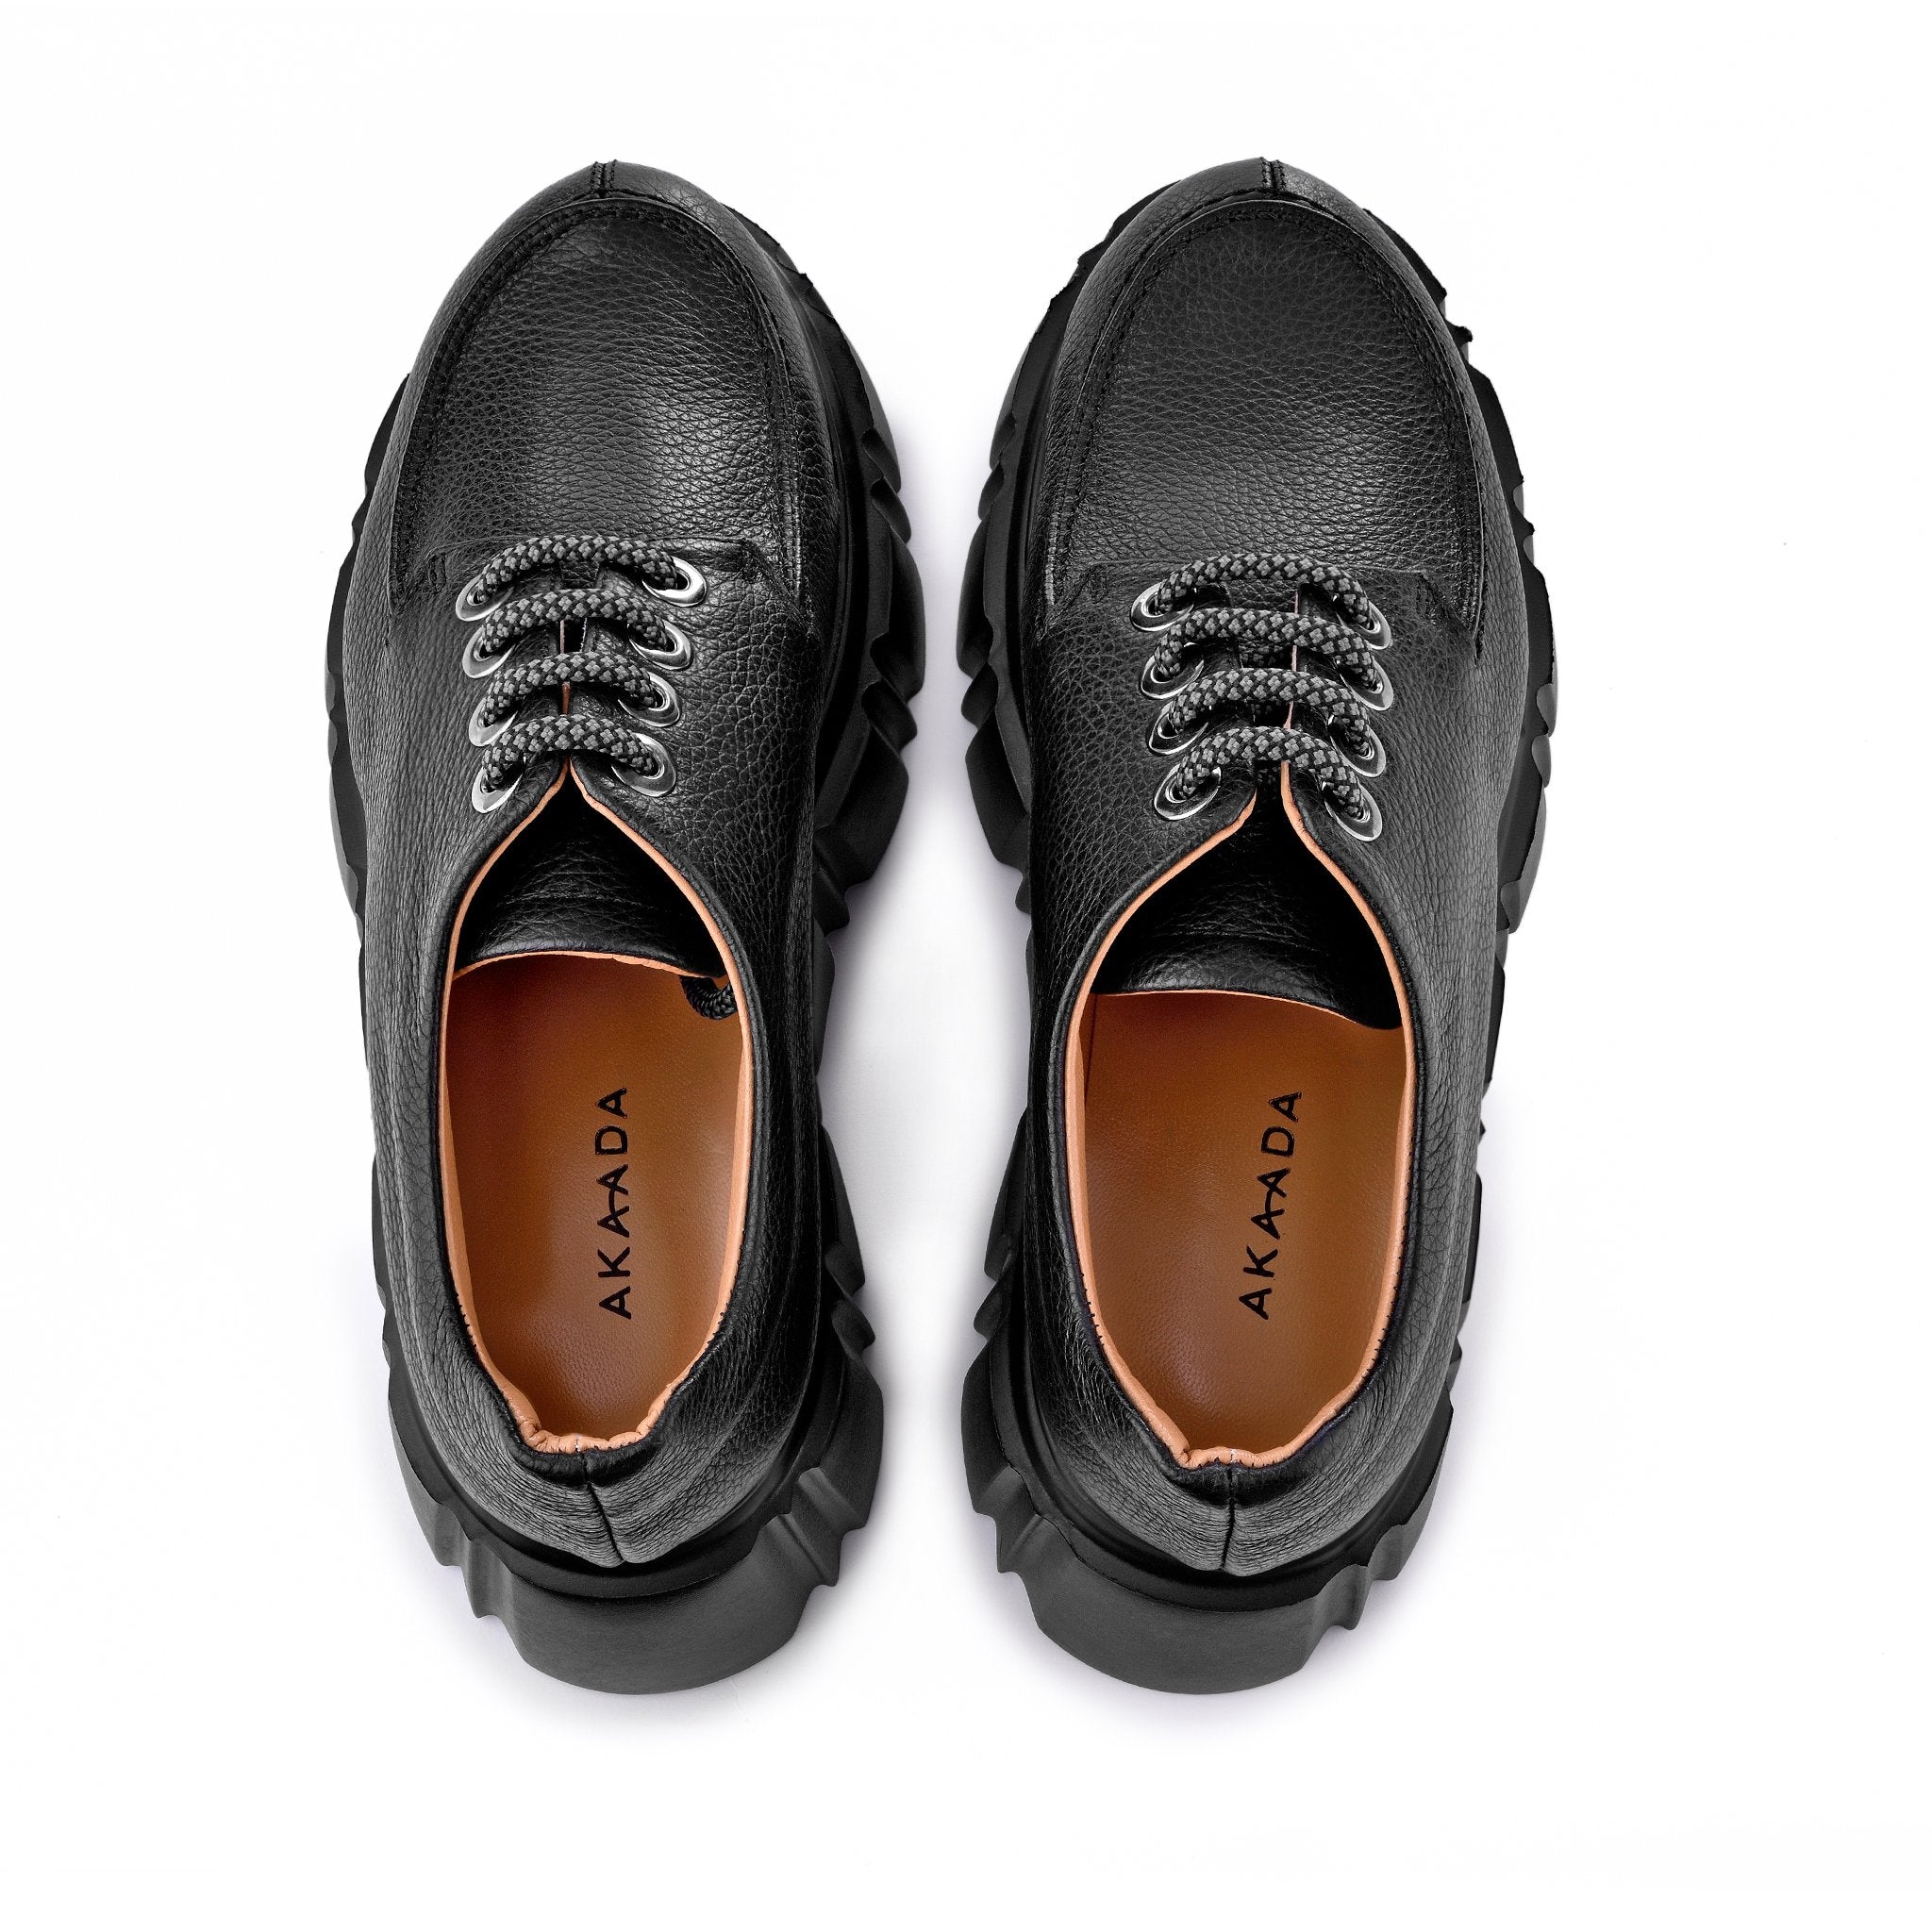 Jun Black Lace-Up Loafers 2210-01 - 03